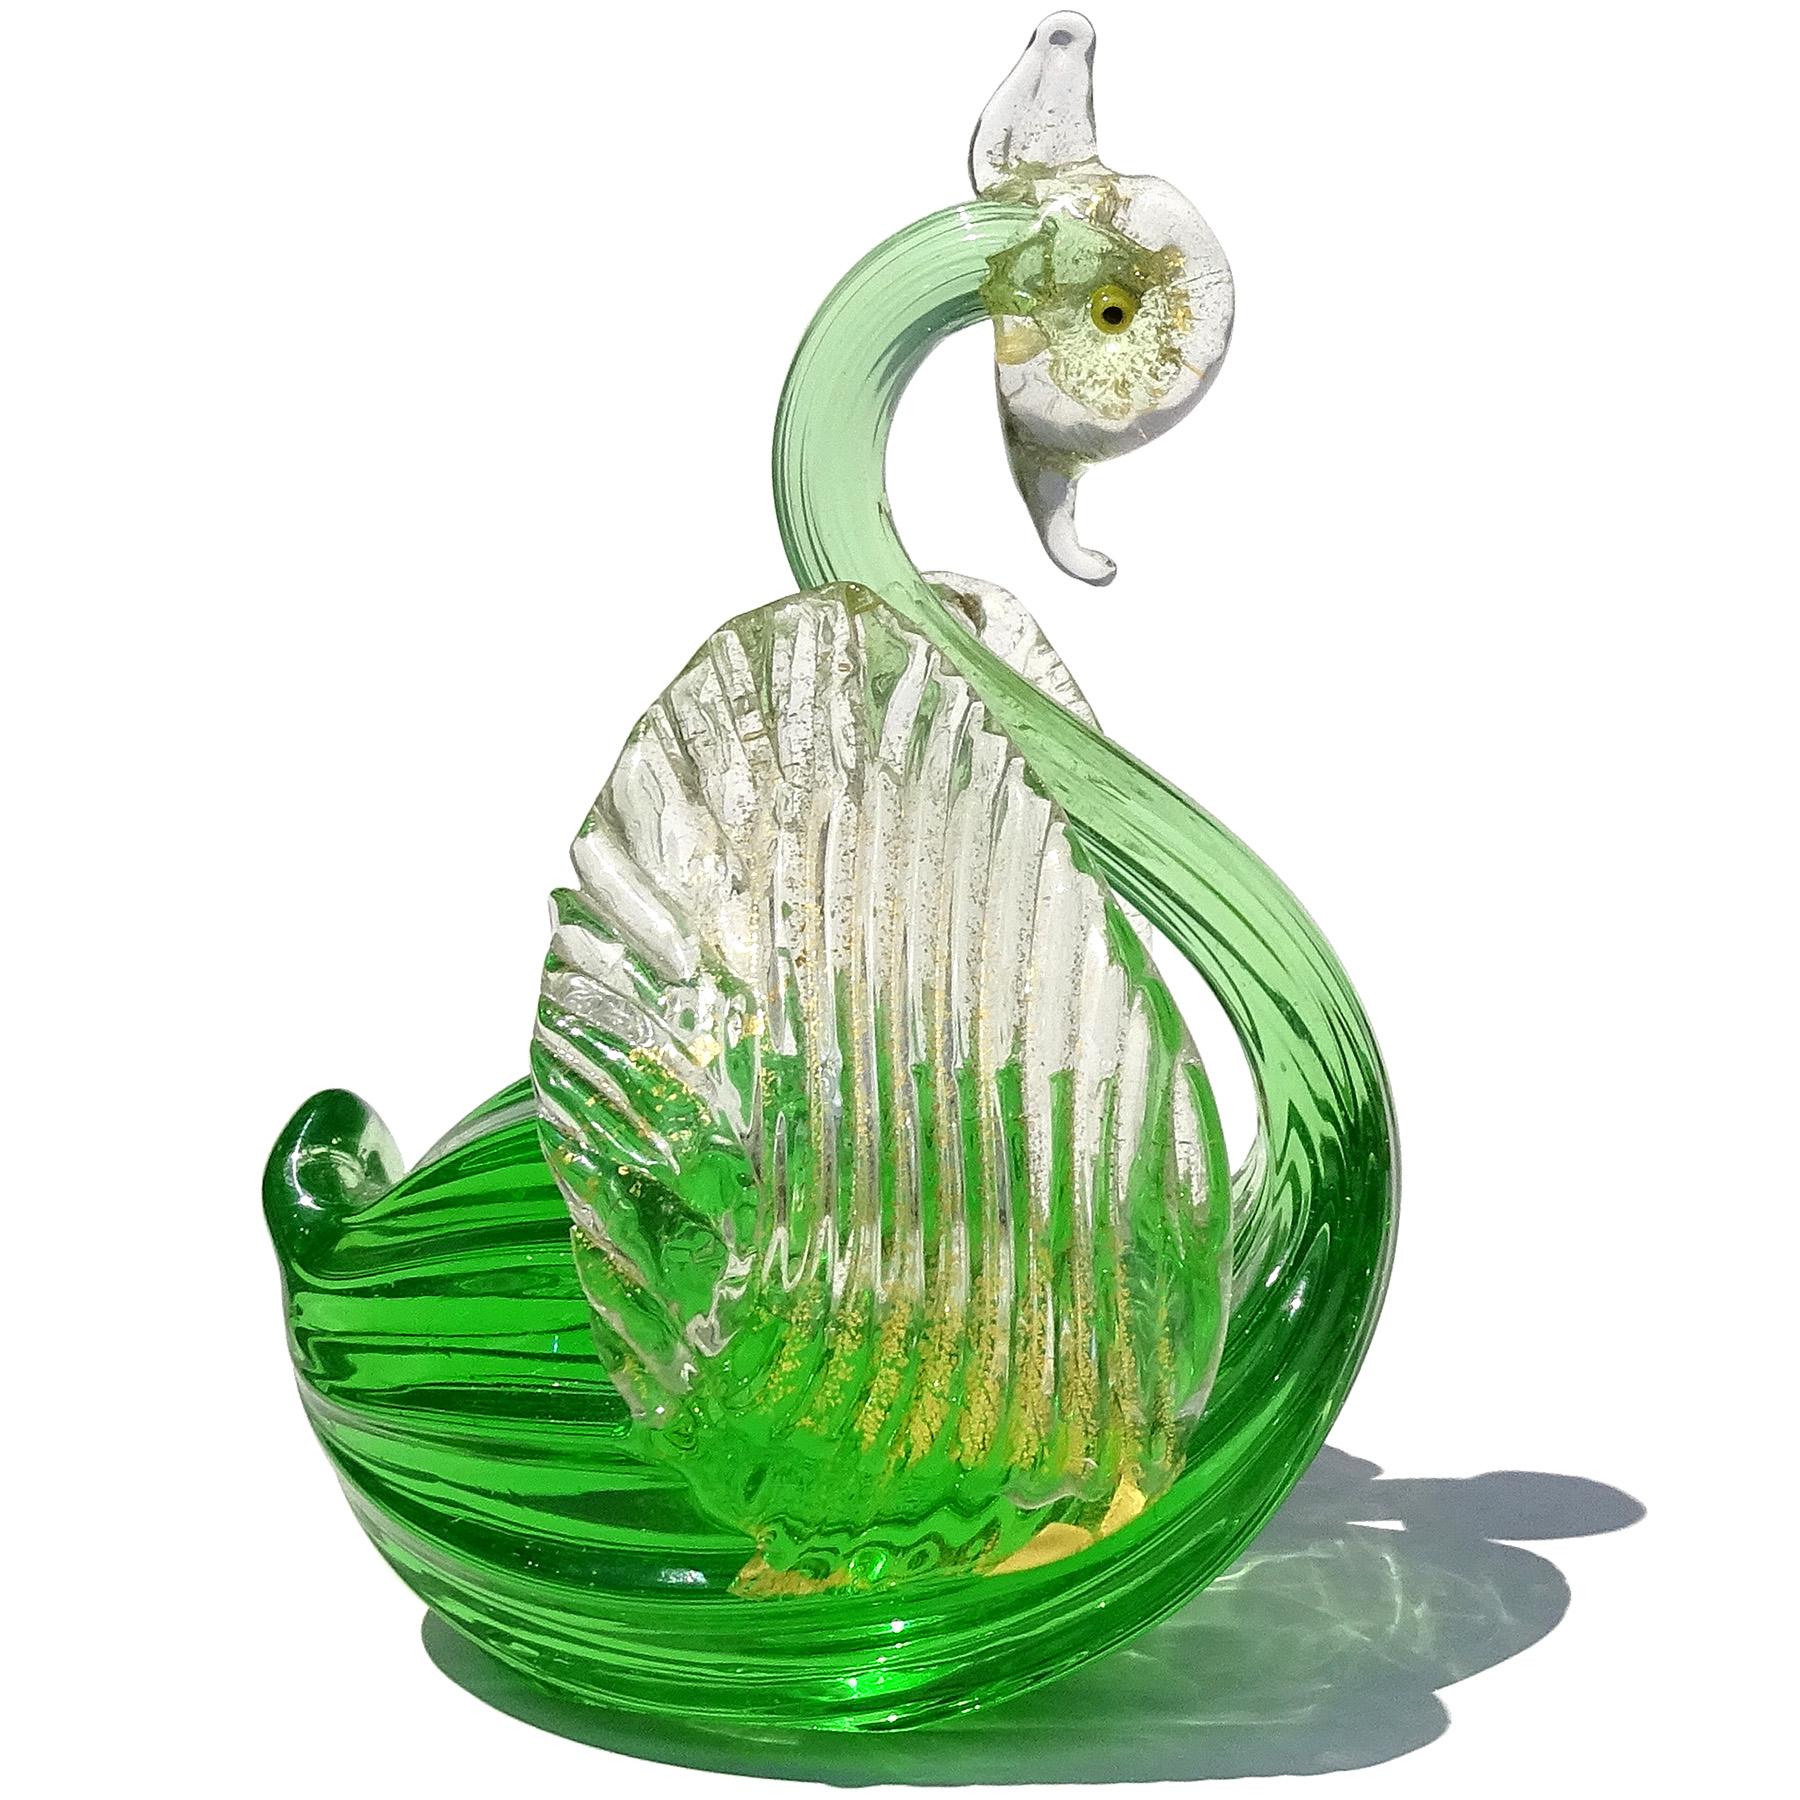 Beautiful vintage Murano hand blown emerald green and gold flecks Italian art glass swan sculpture / figurine. The bird has a long thin neck with outstretched wings. The eyes are made with little yellow and black canes. The head and wings are filled